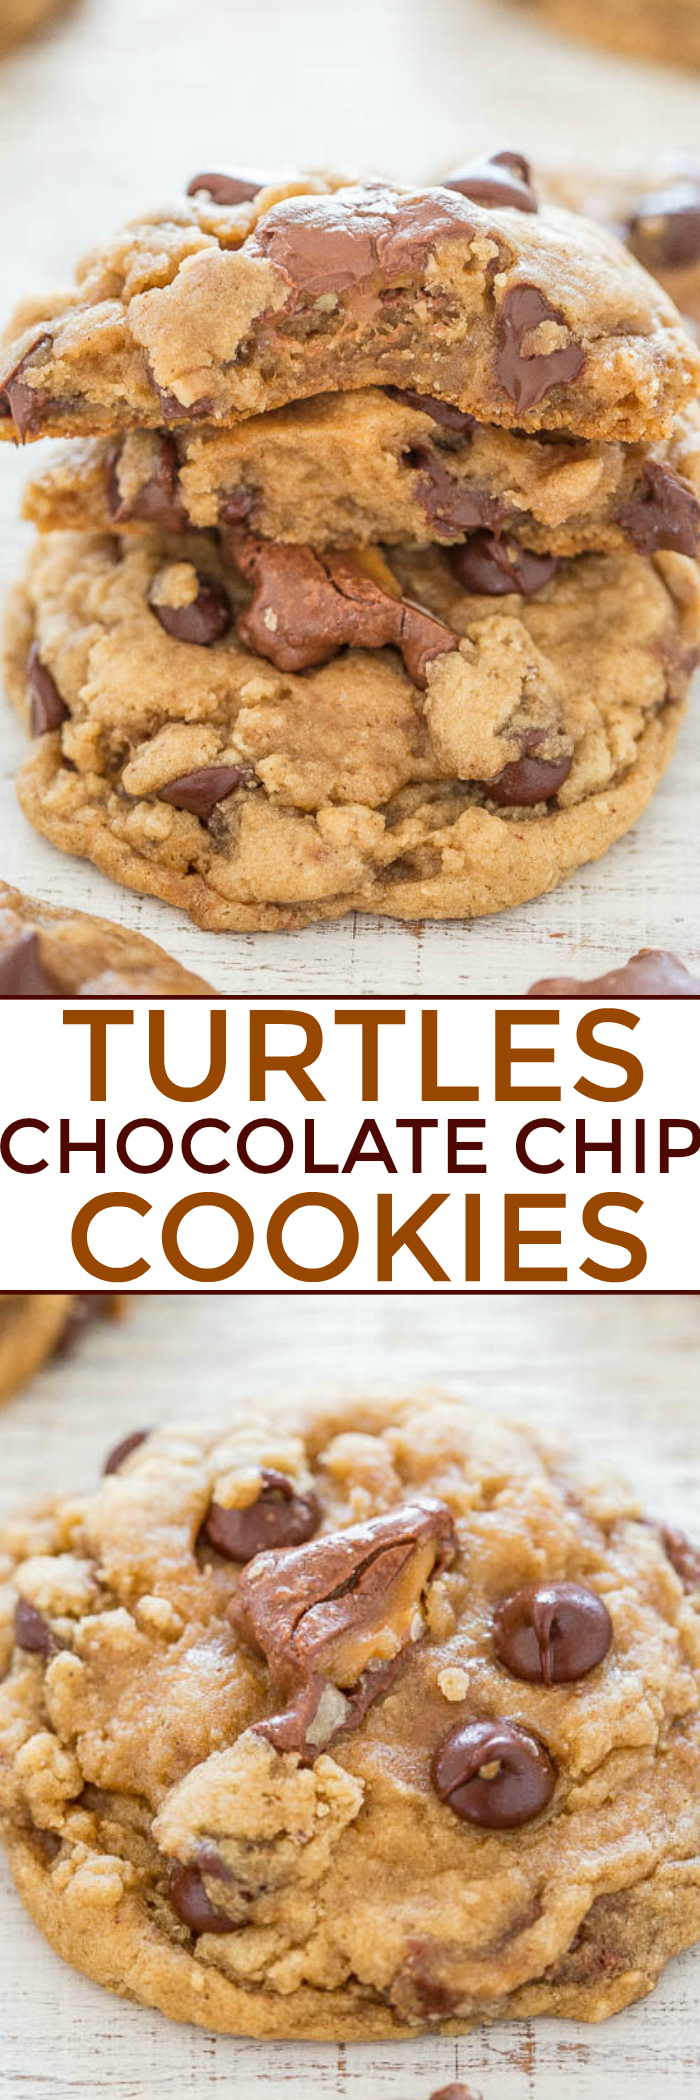 TURTLES® Chocolate Chip Cookies - The BEST chocolate chip cookies stuffed with TURTLES candies!! Soft, chewy, and buttery with caramel and chocolate! They'll be your new FAVORITE chocolate chip cookies!!